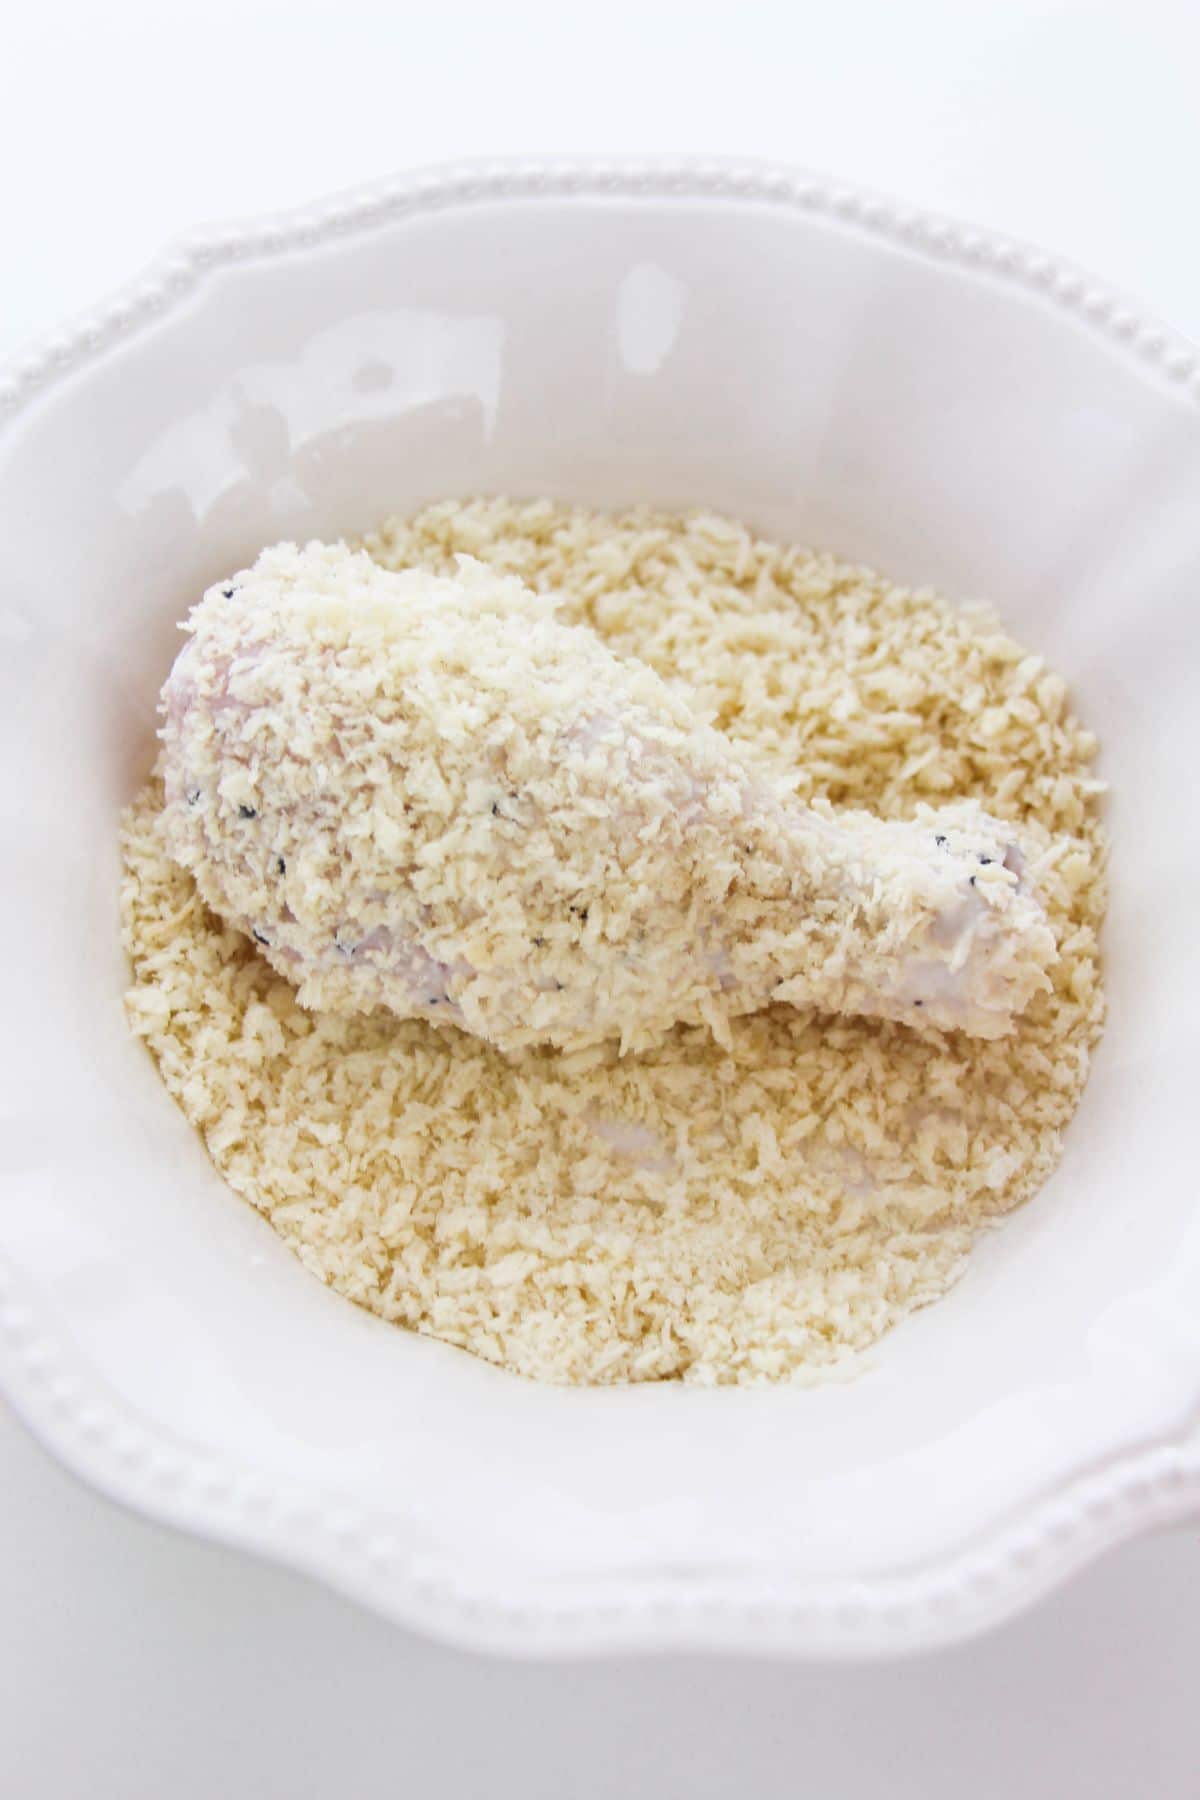 Chicken drumstick on the last bowl for dredging - breadcrumbs.